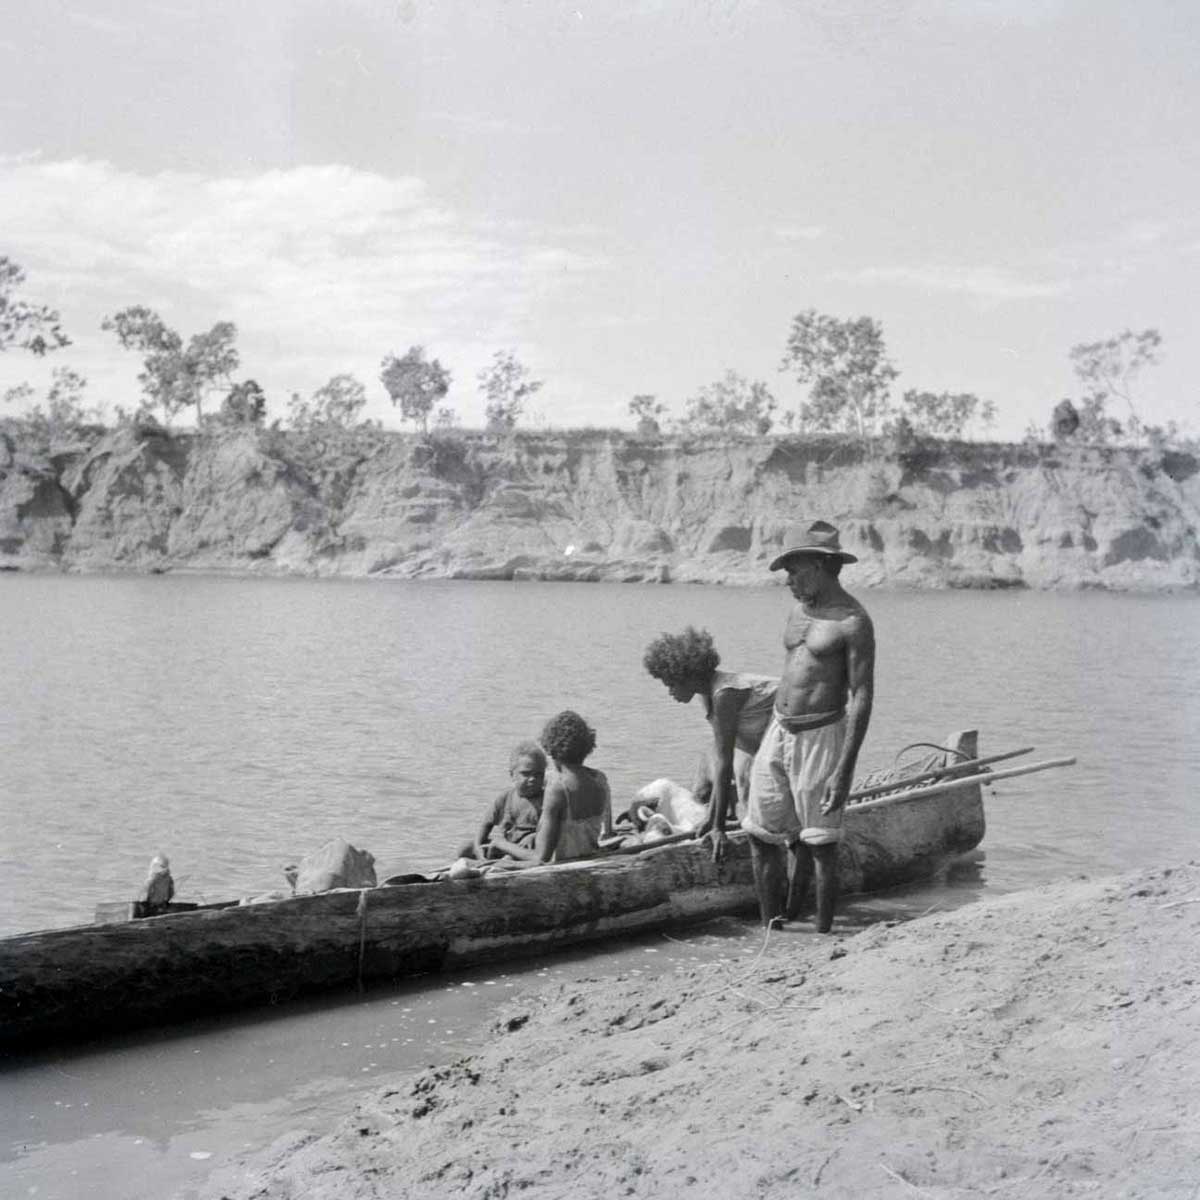 A black and white photographic negative that depicts an Aboriginal man and woman standing on a riverbank next to a canoe with a child and adult sitting in the canoe. - click to view larger image